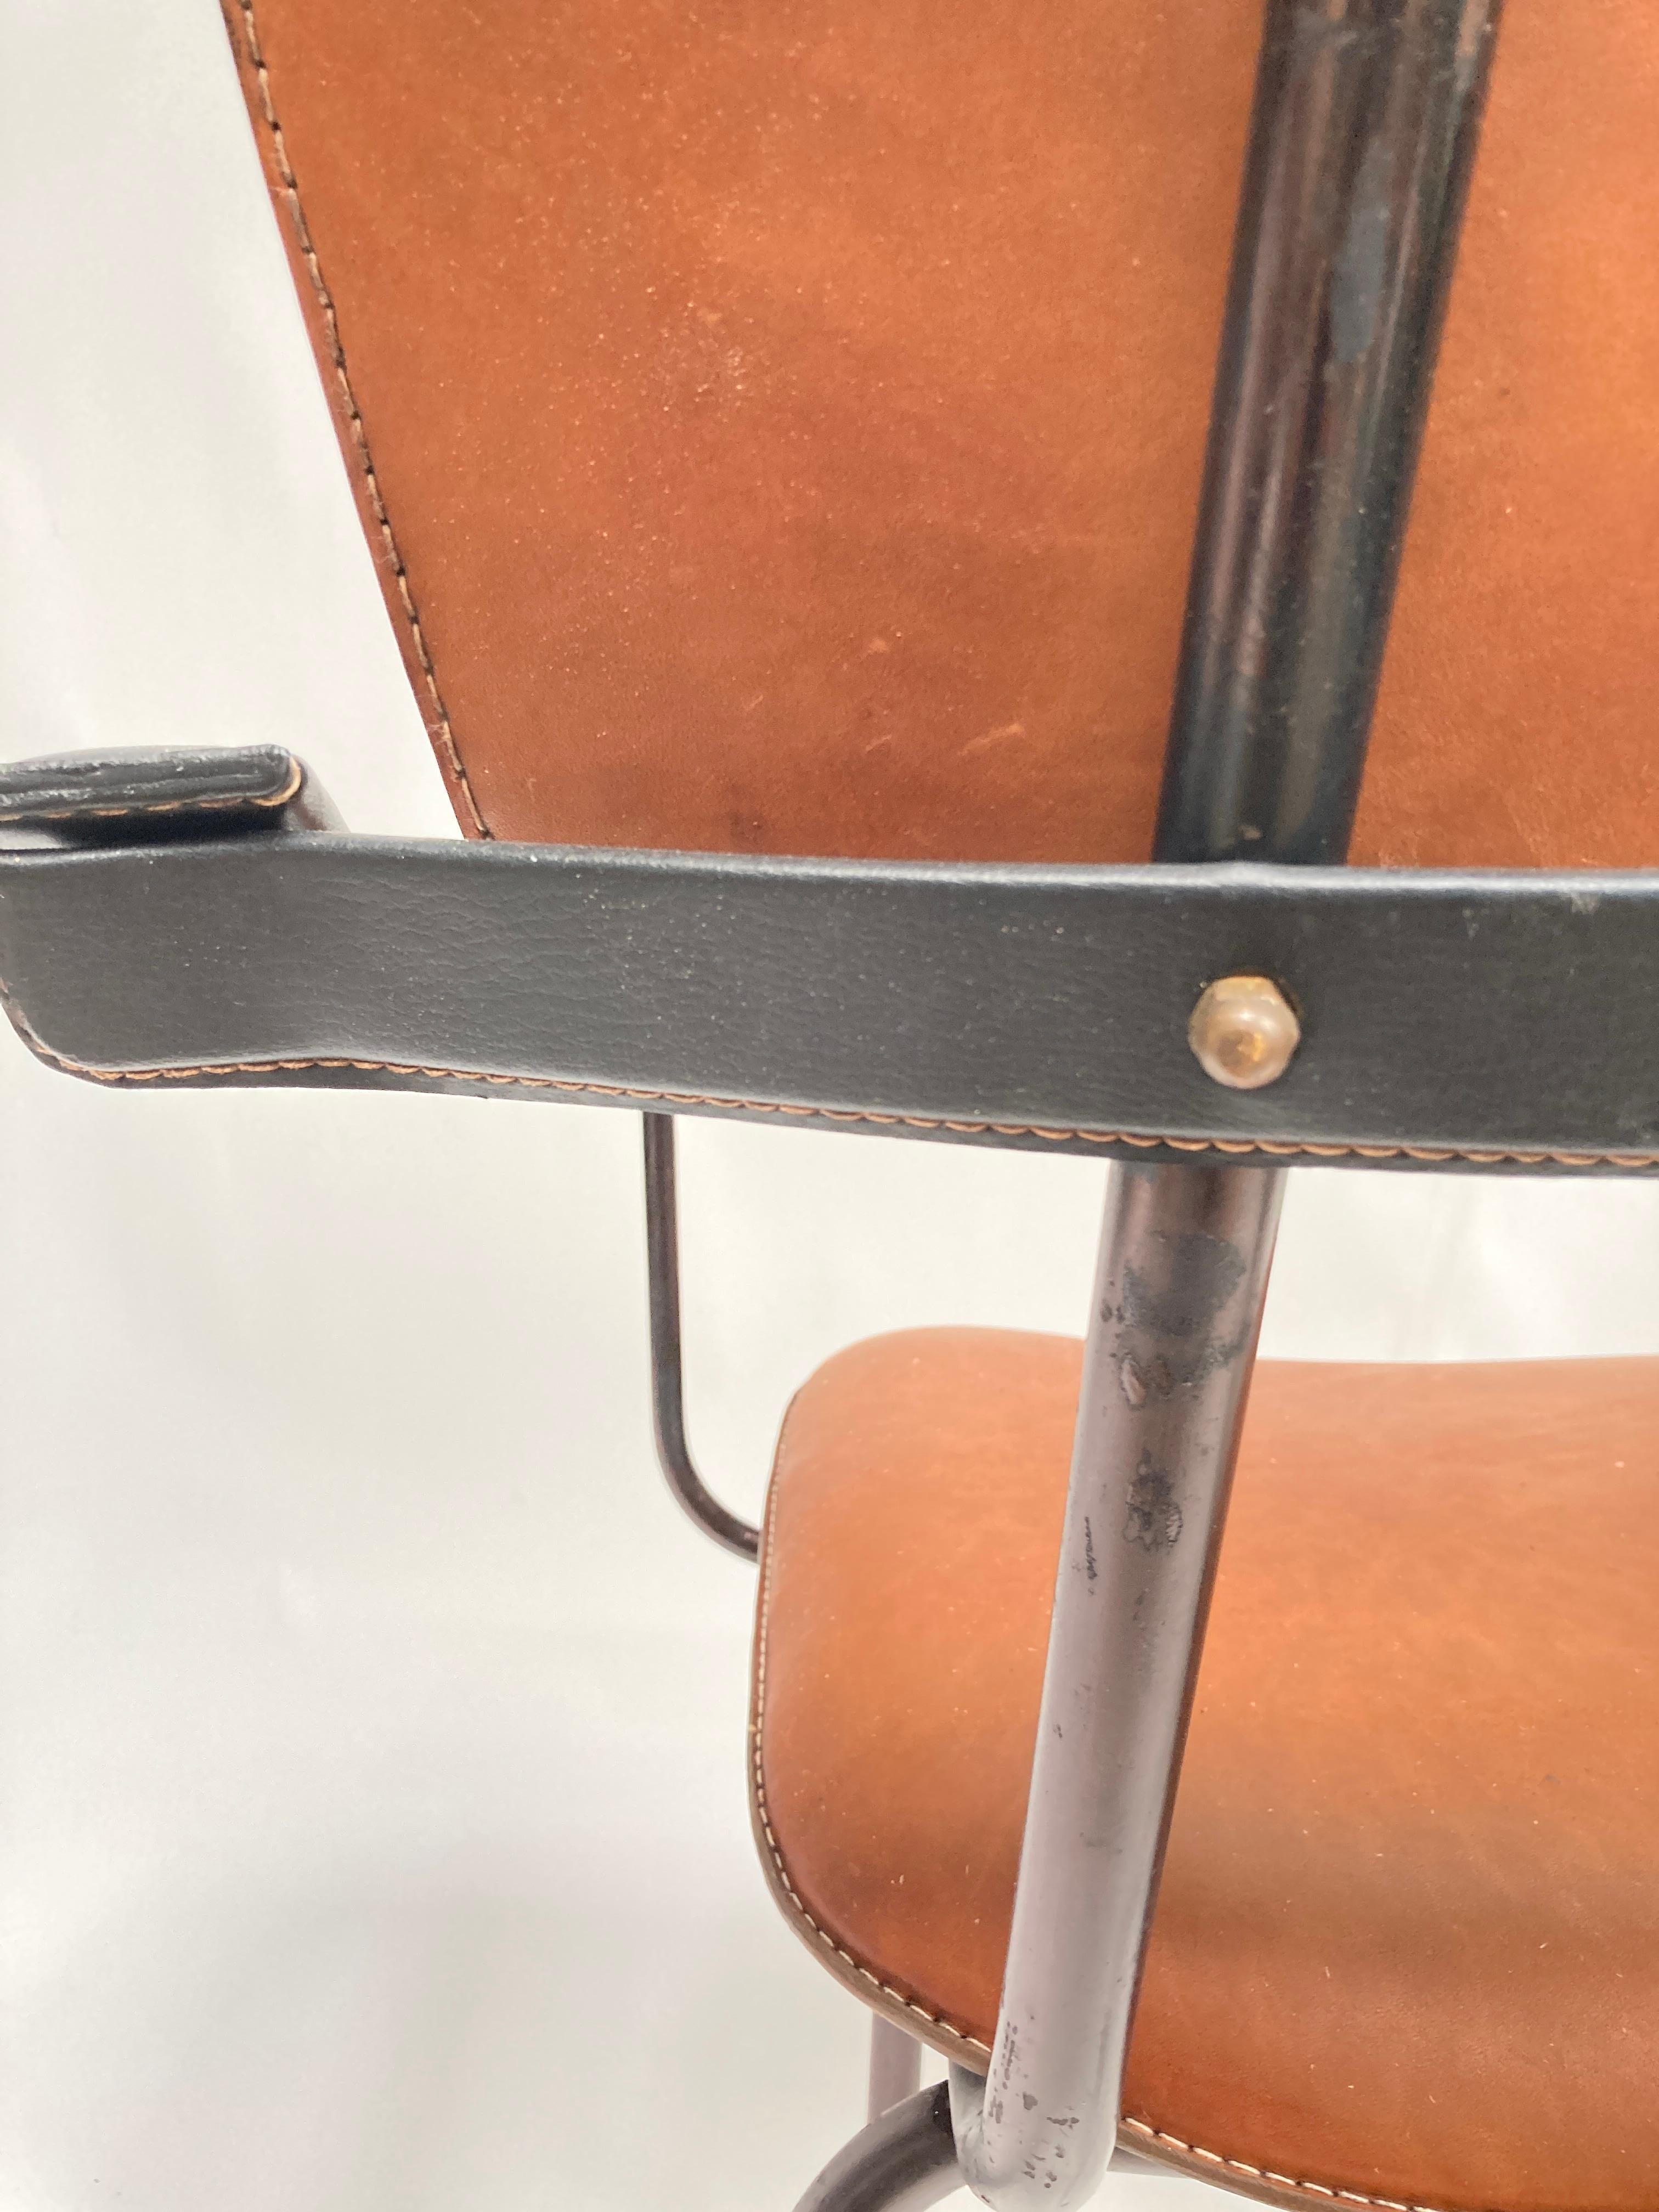 1950's Stitched leather armchair by Jacques Adnet  For Sale 2